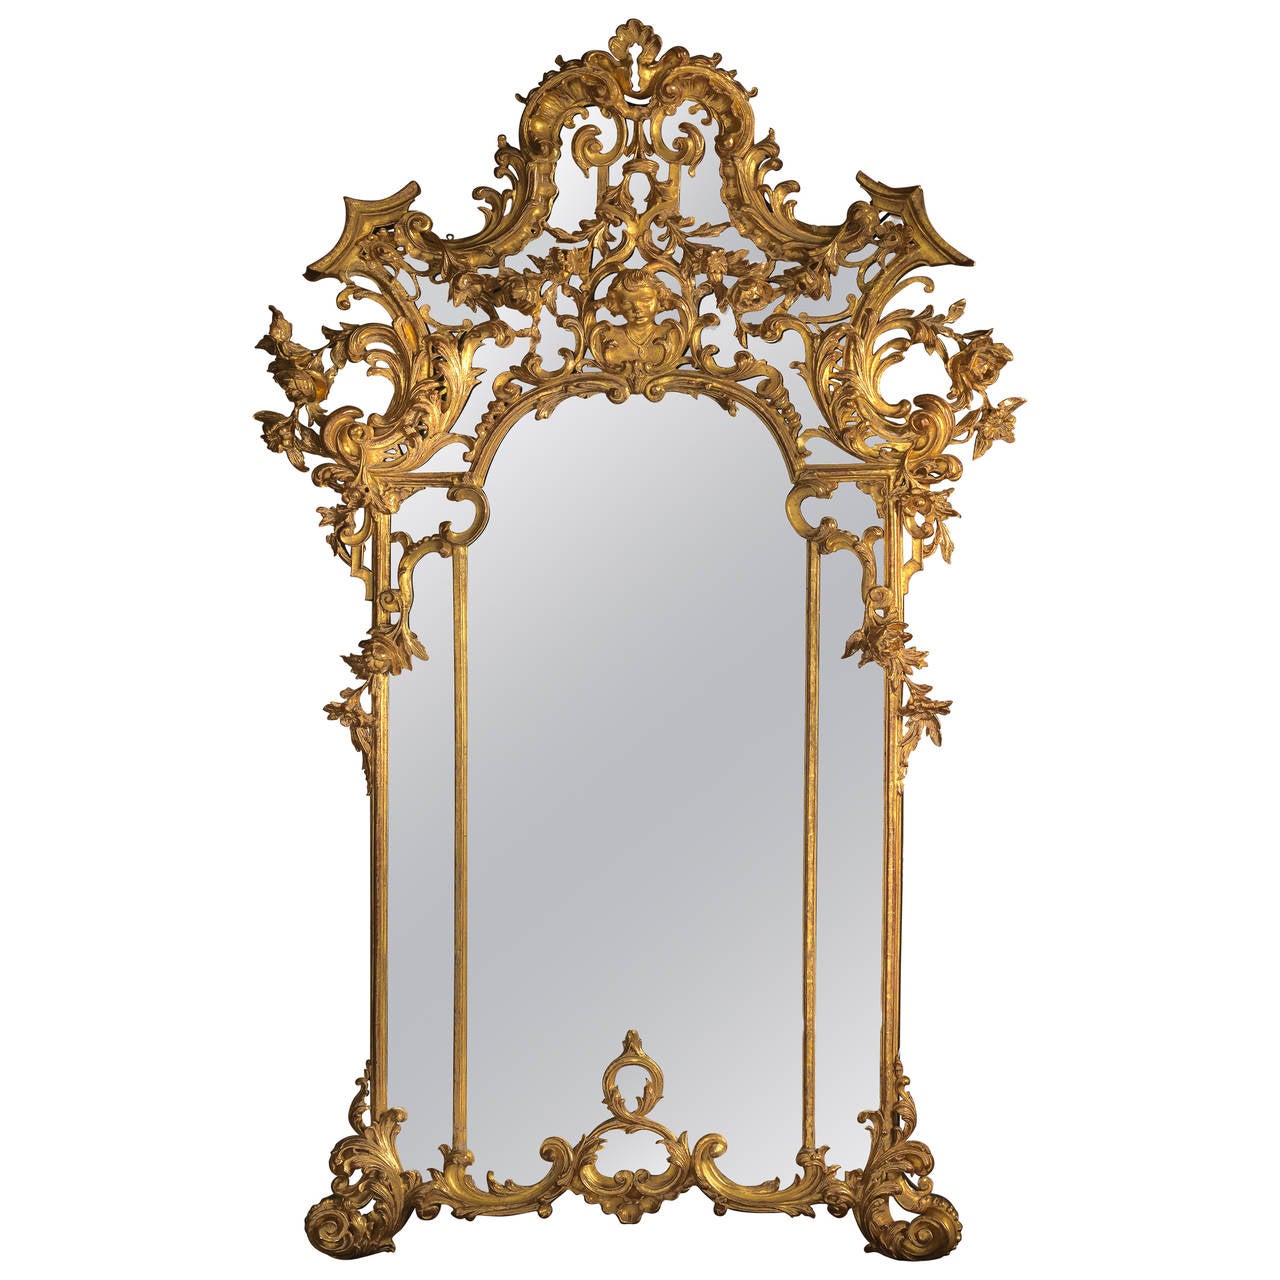 Rococo Style Giltwood Mirror For Sale at 1stdibs